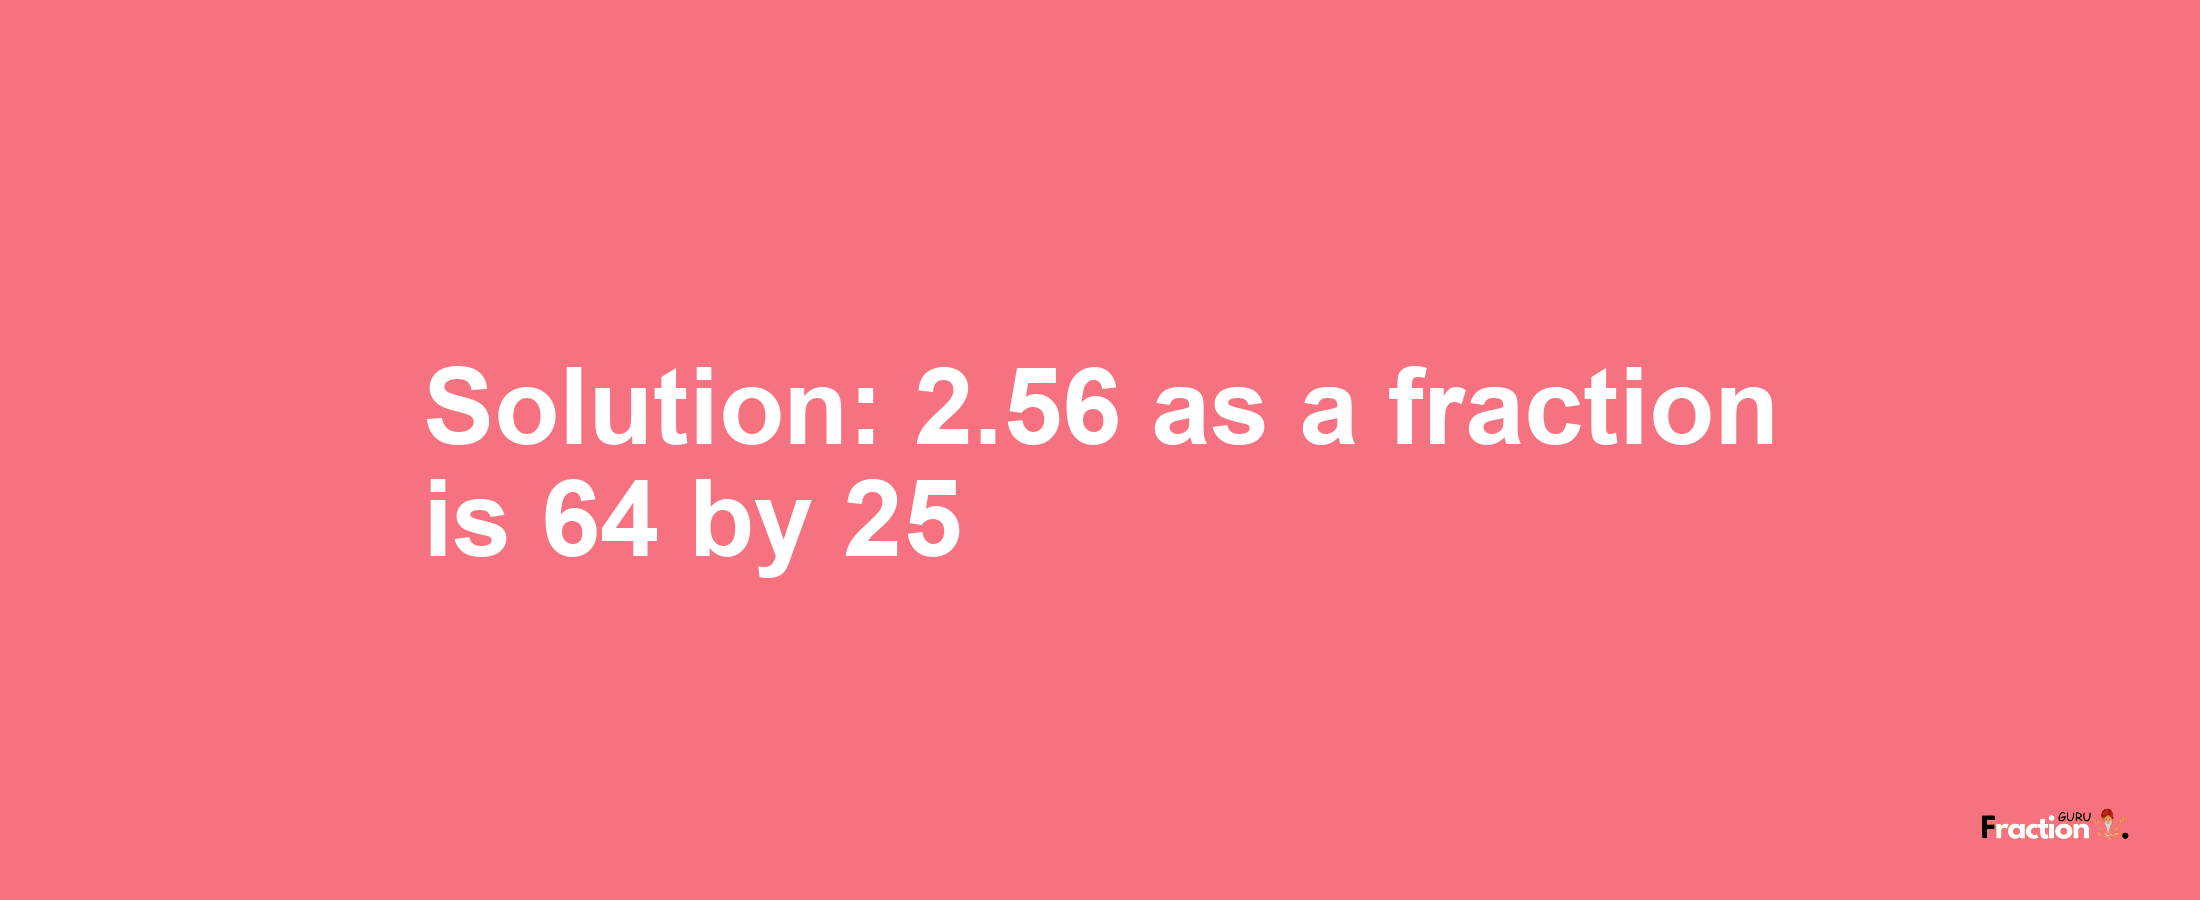 Solution:2.56 as a fraction is 64/25